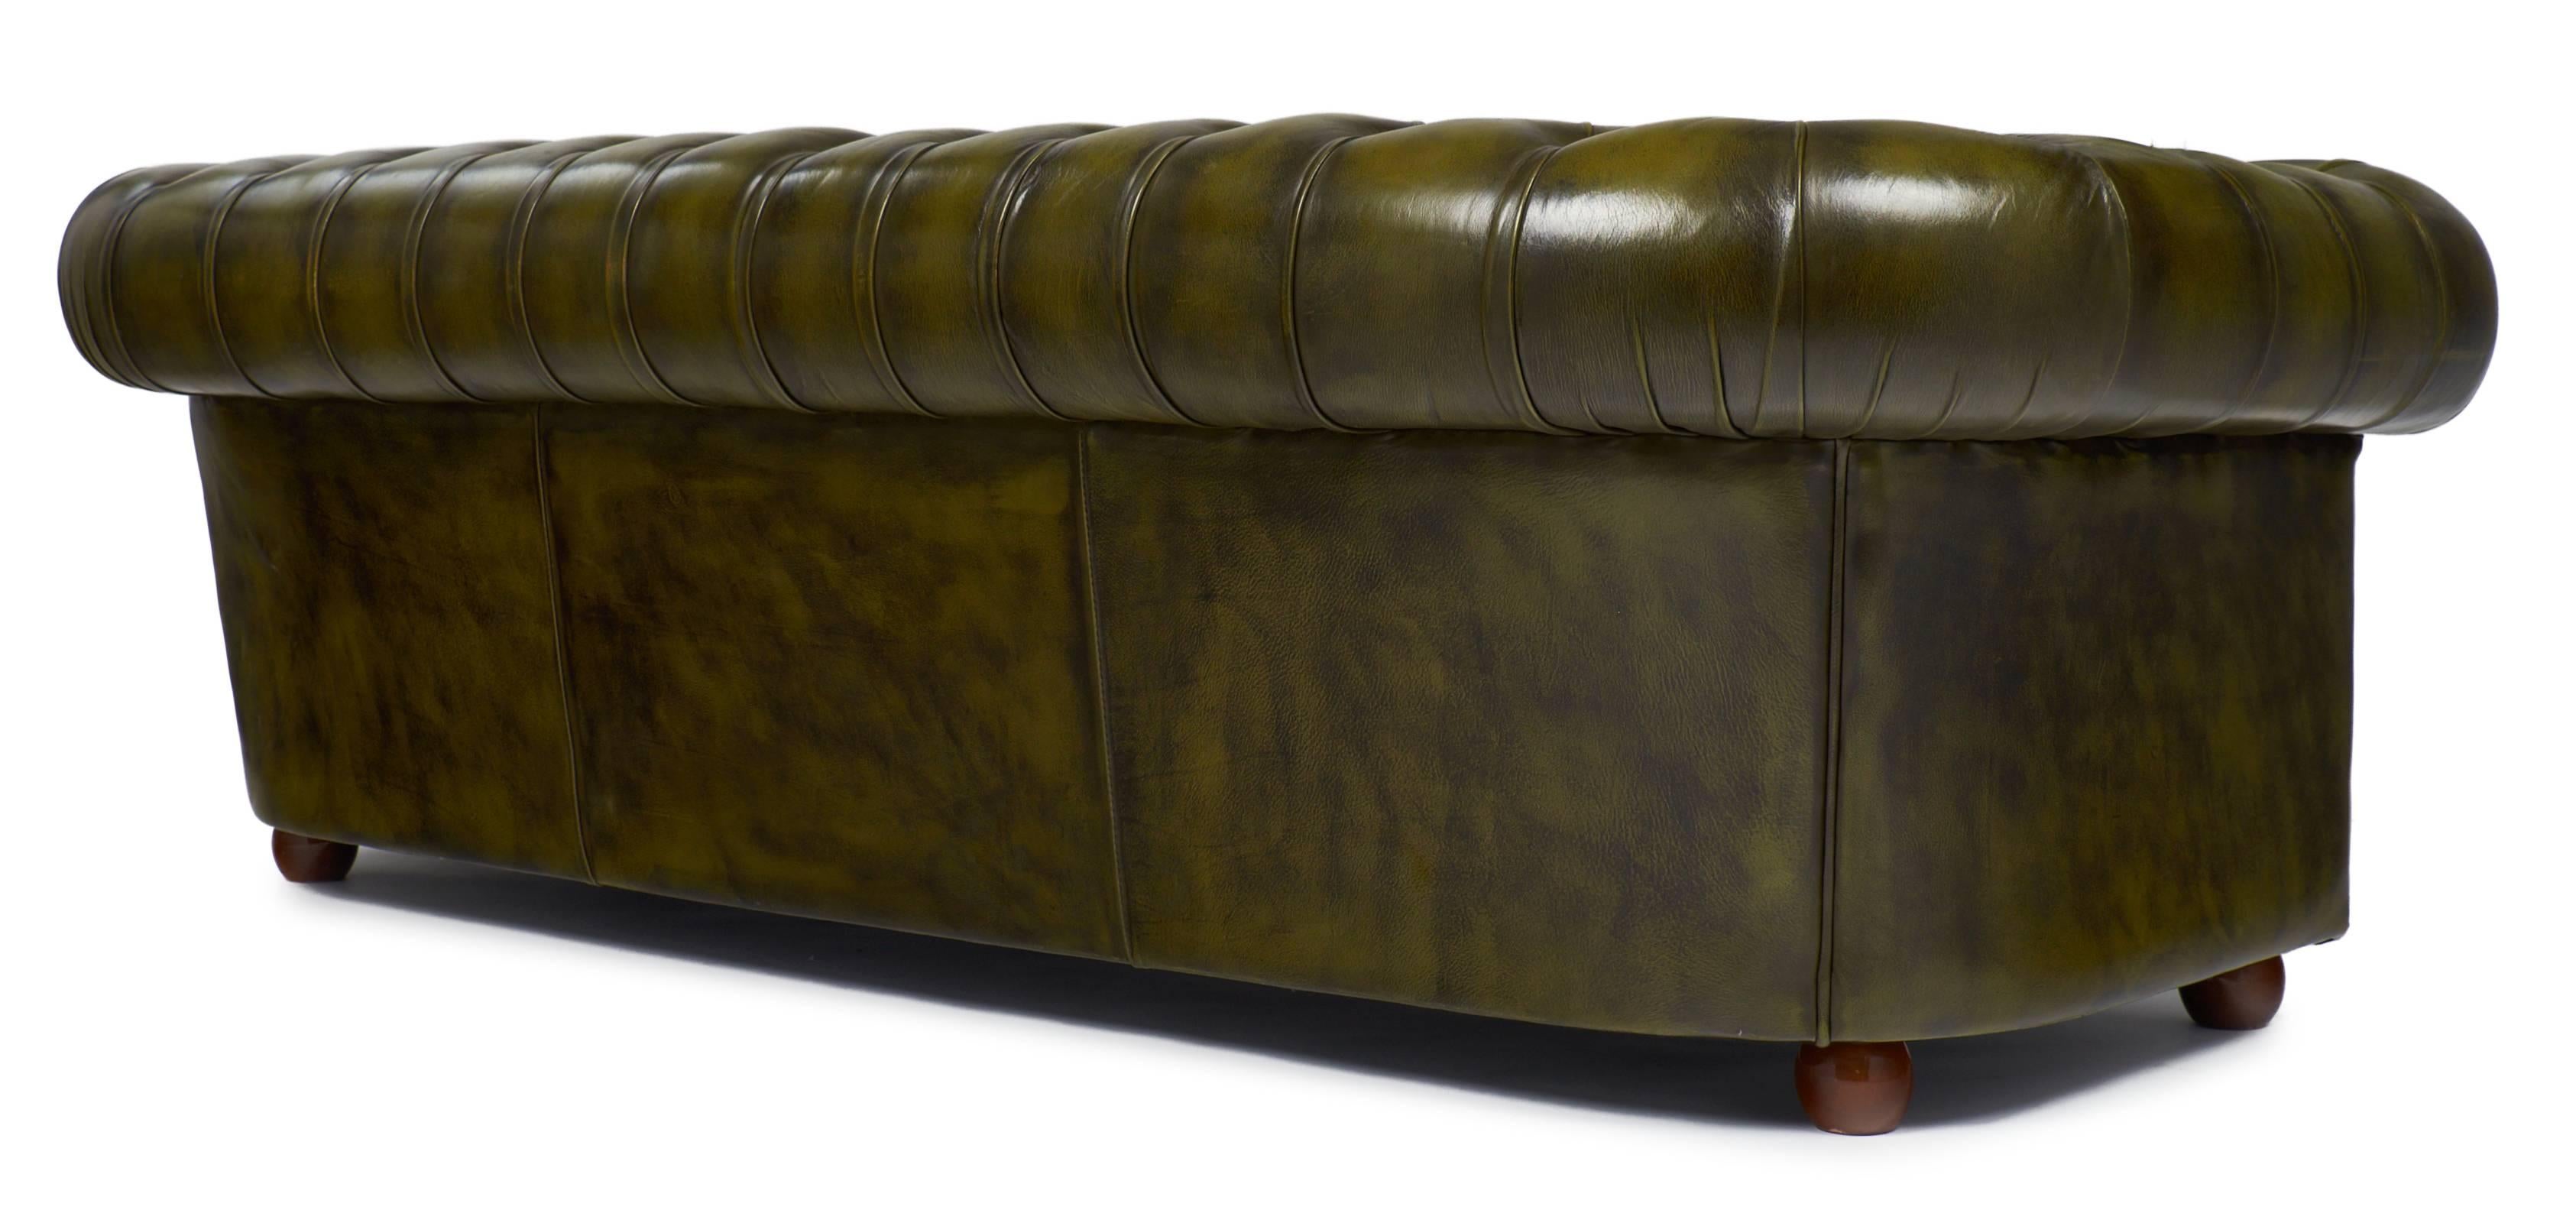 English Vintage Green Leather Chesterfield Sofa